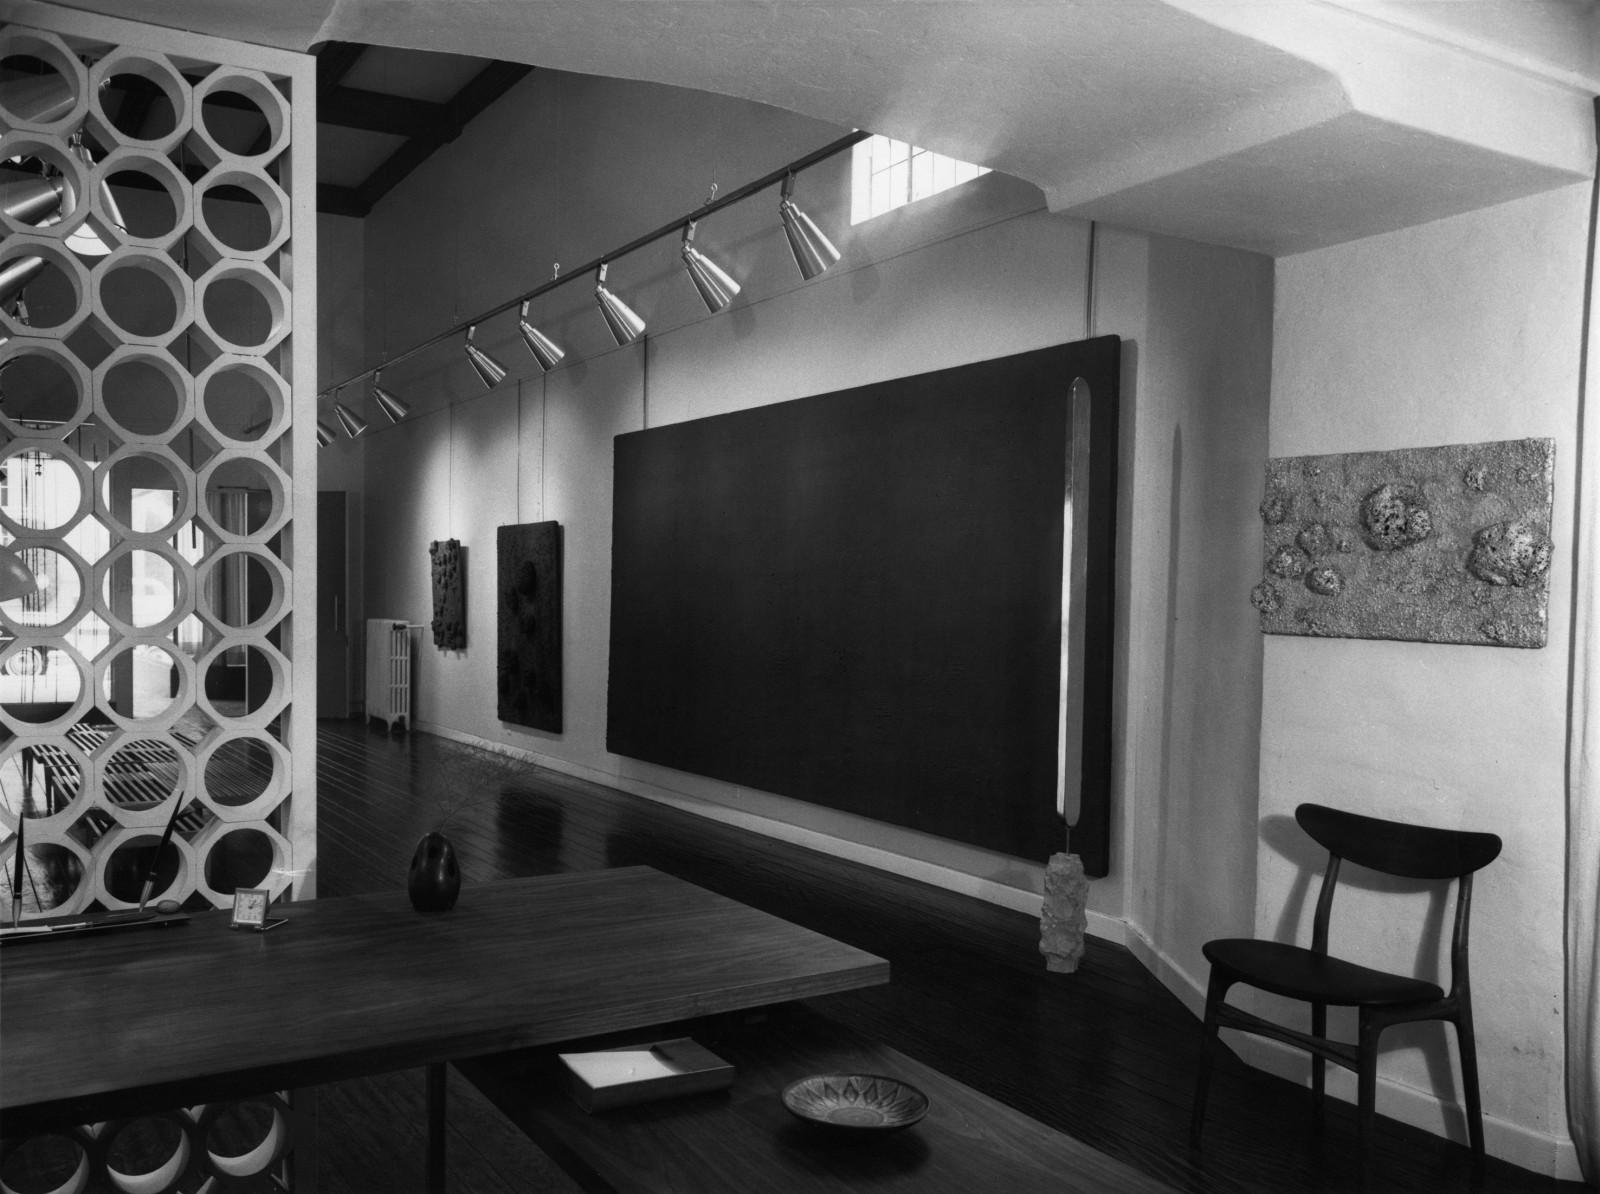 View of the exhibition "Yves Klein le Monochrome", Dwan Gallery, Los Angeles, 1961